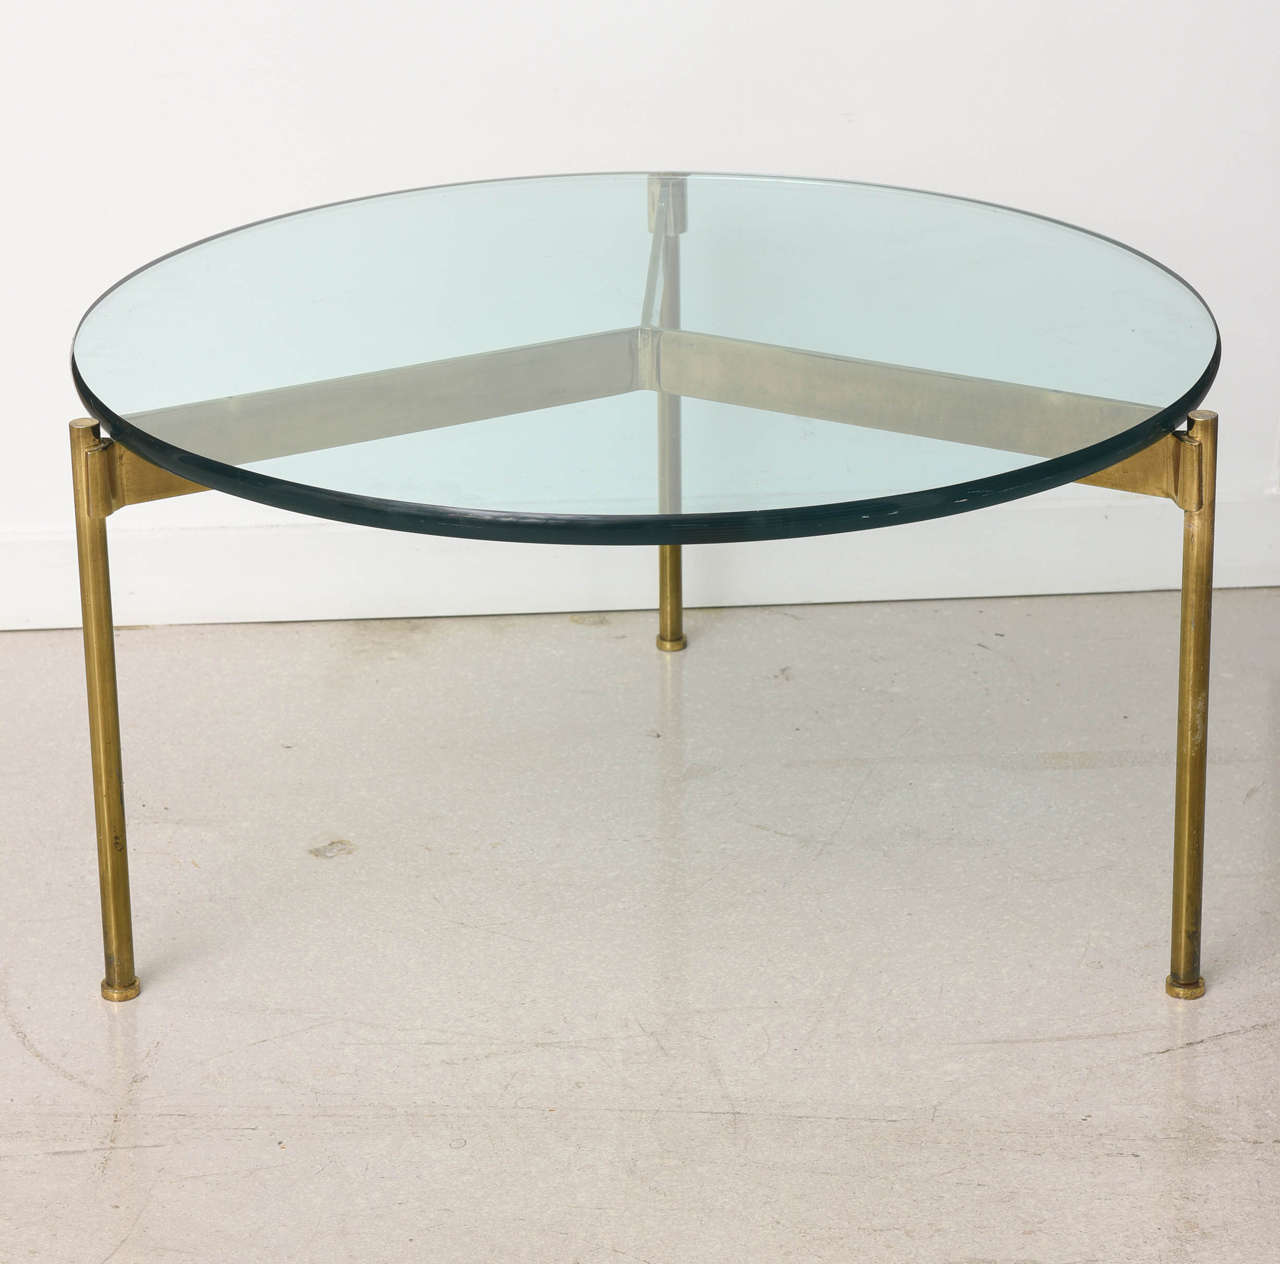 Vintage circular brass and glass coffee table by Ward Bennett.